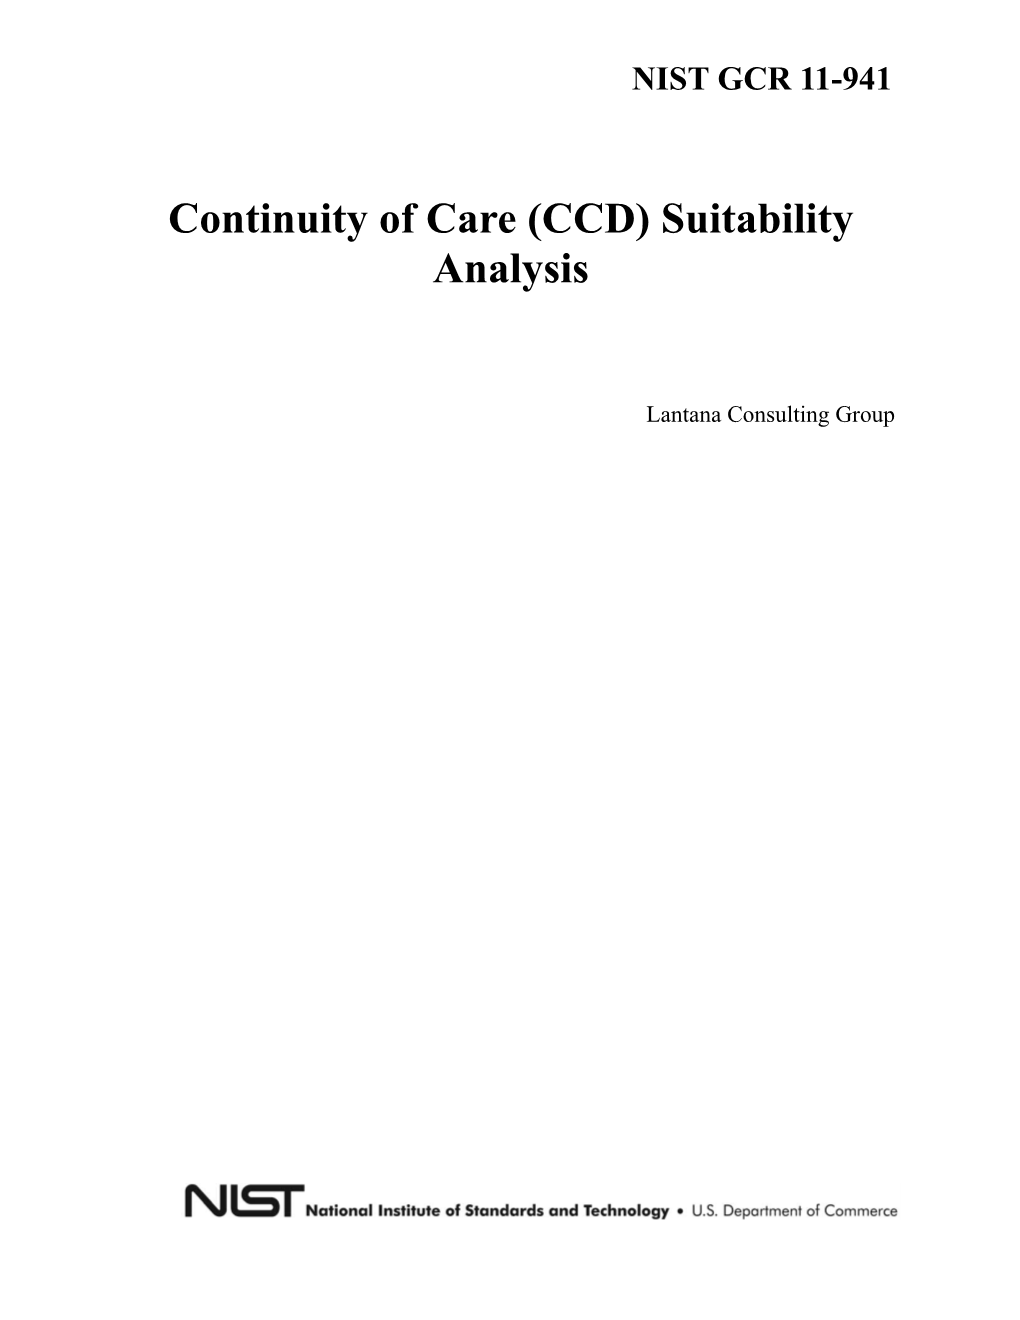 Continuity of Care (CCD) Suitability Analysis